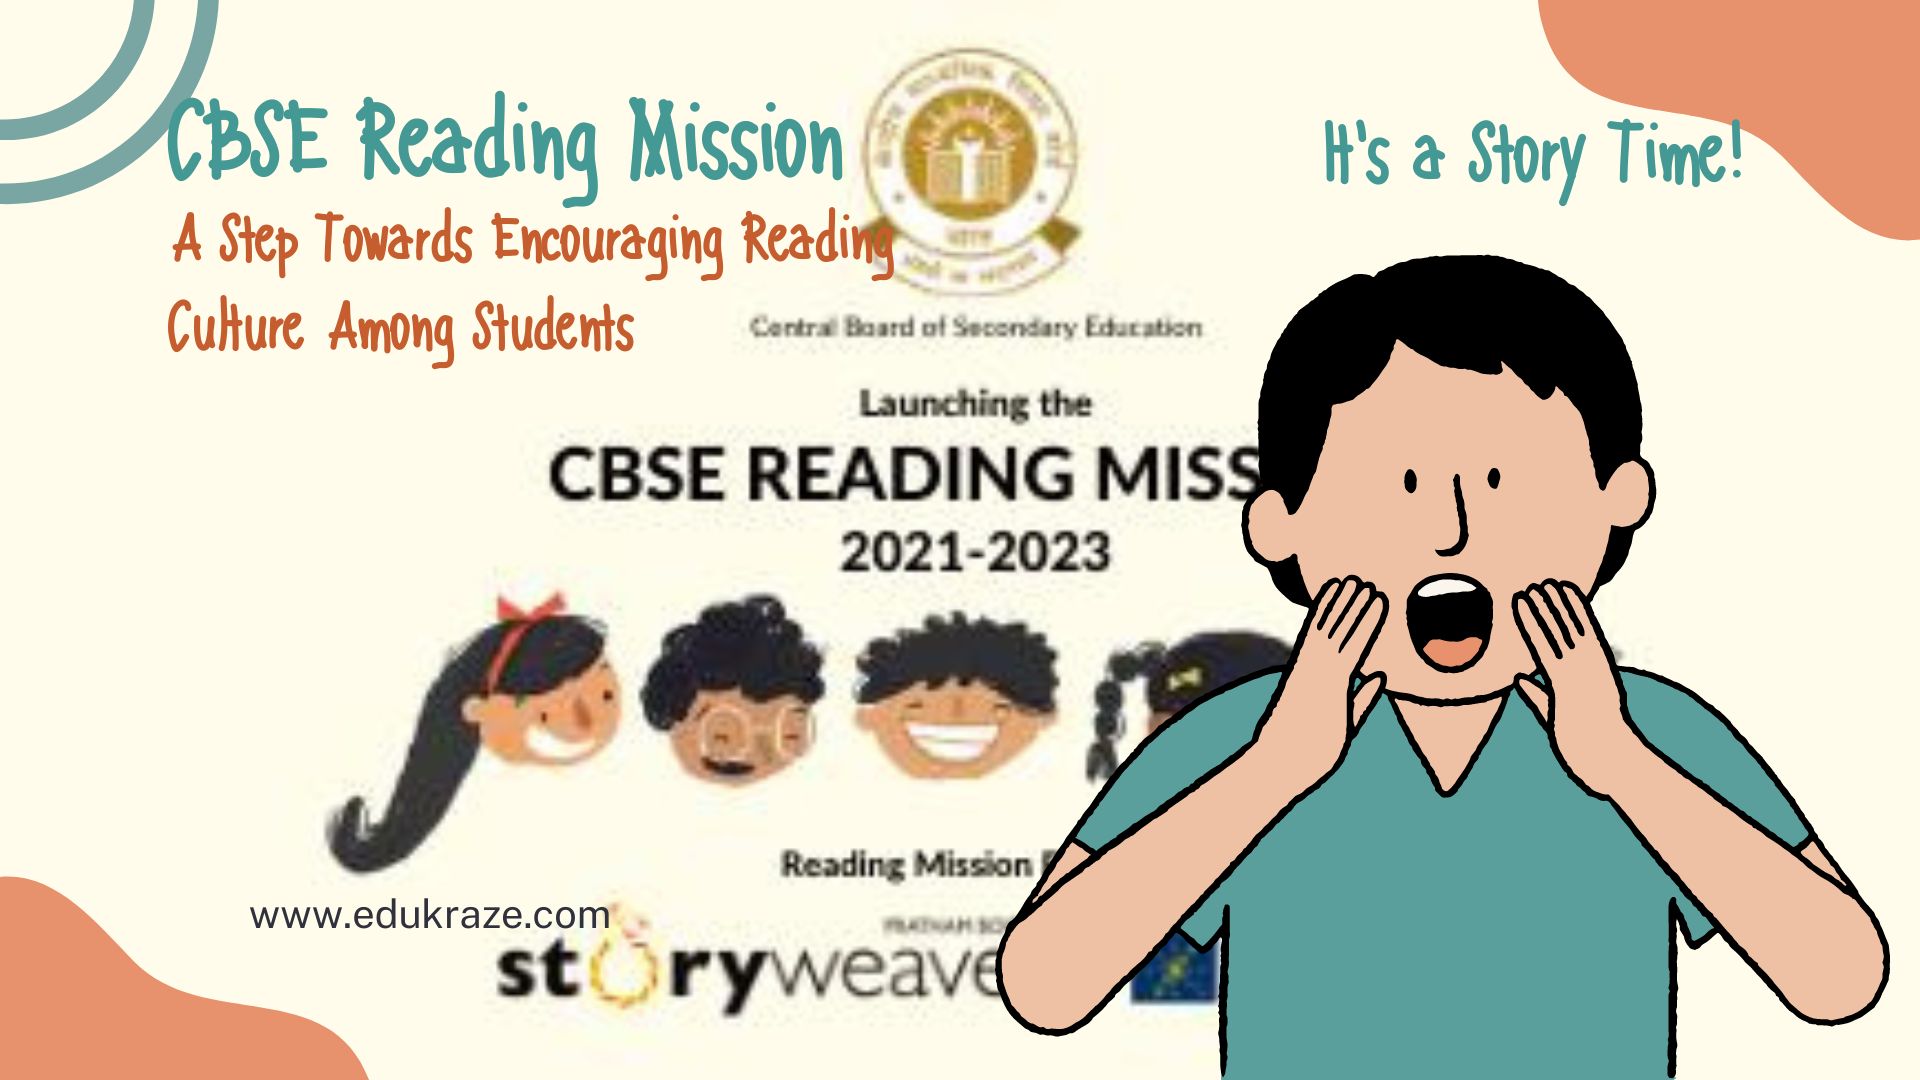 CBSE Reading Mission: A Step Towards Encouraging Reading Culture Among Students